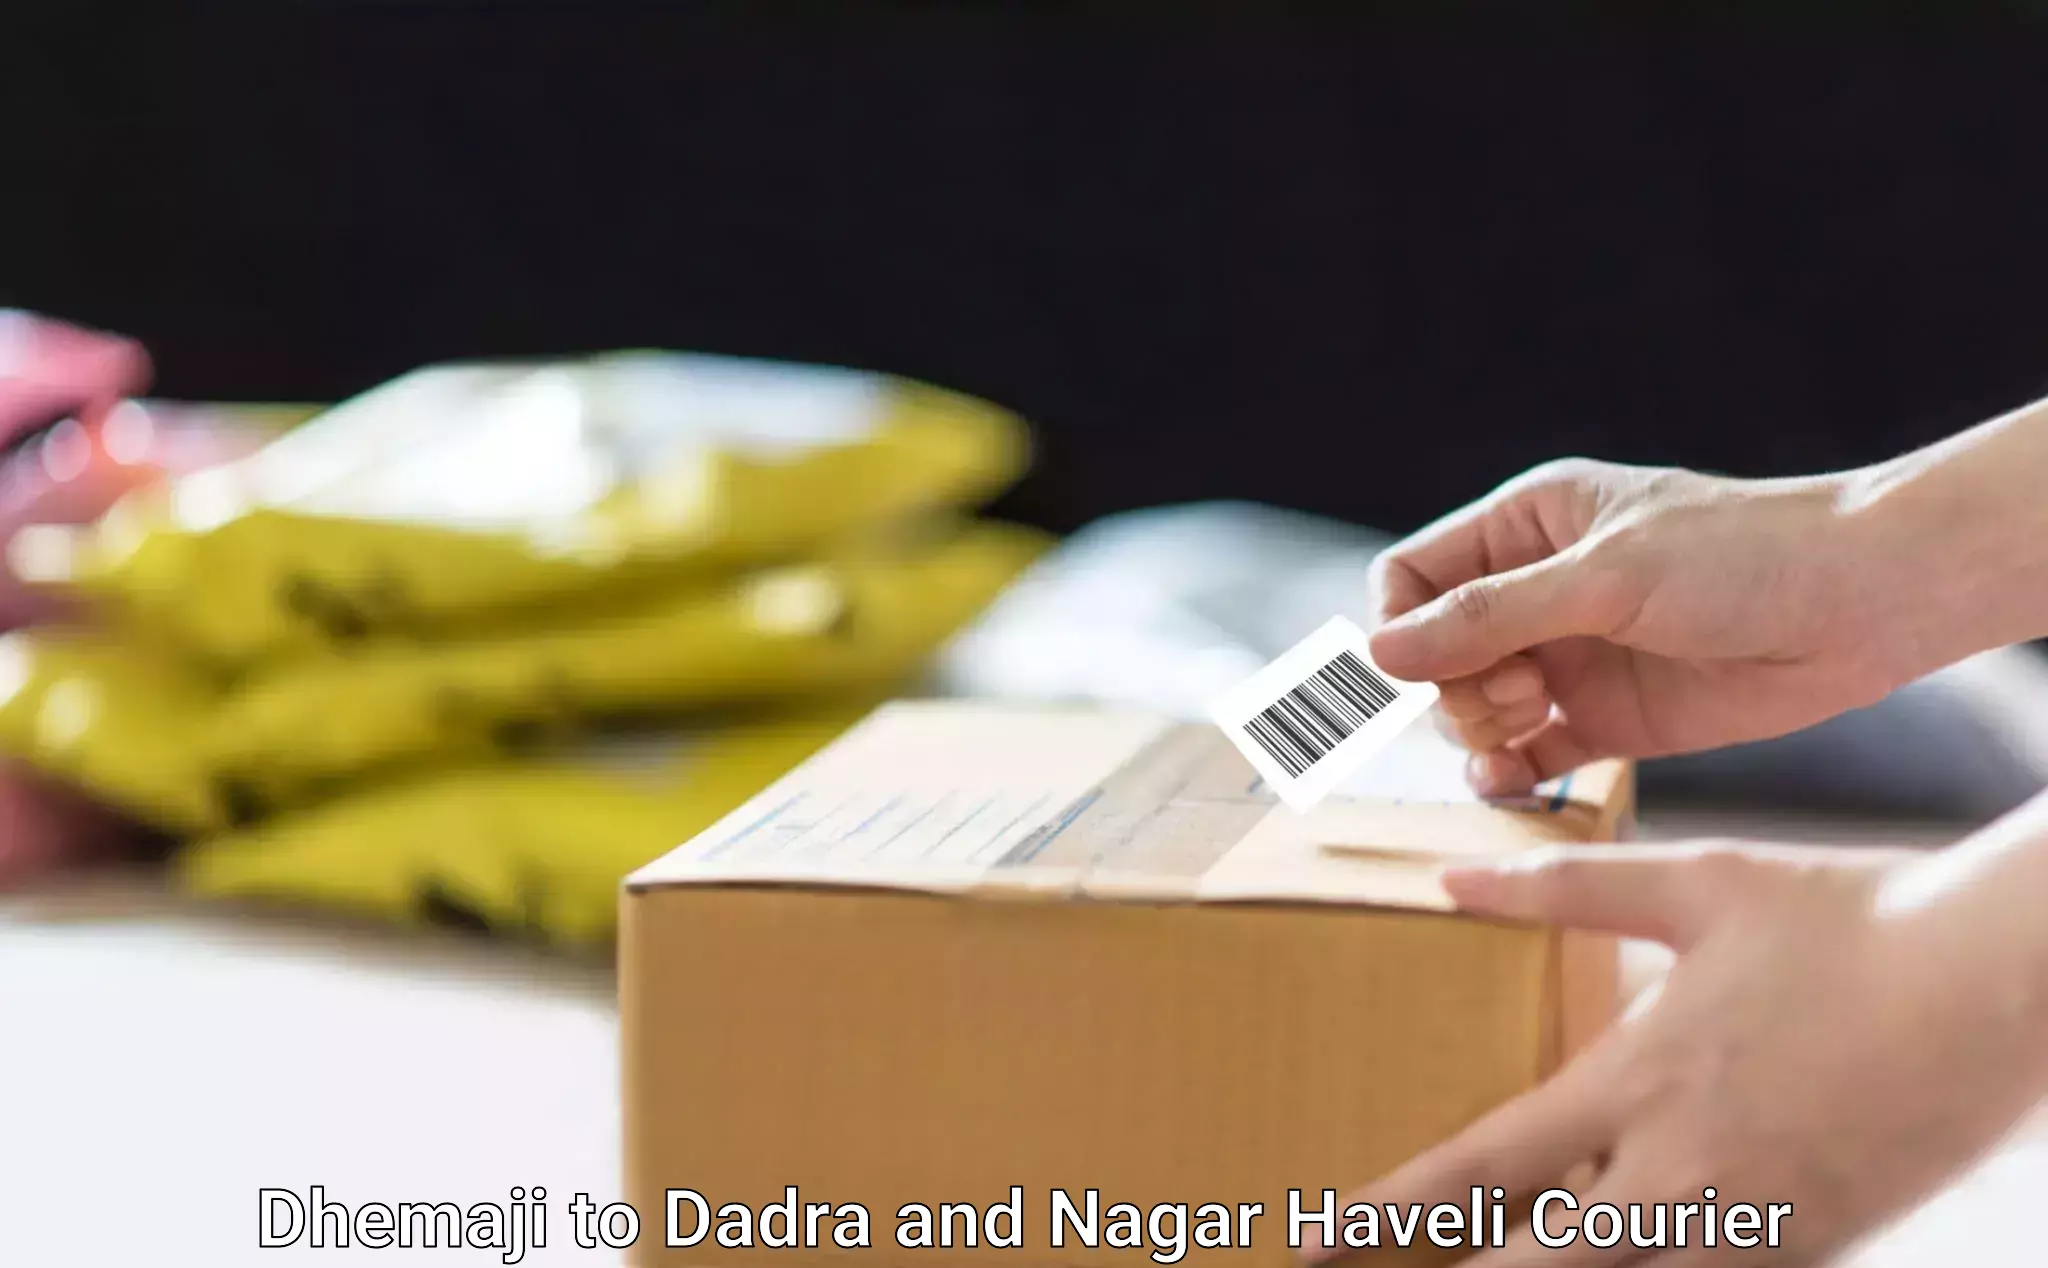 Courier services Dhemaji to Dadra and Nagar Haveli